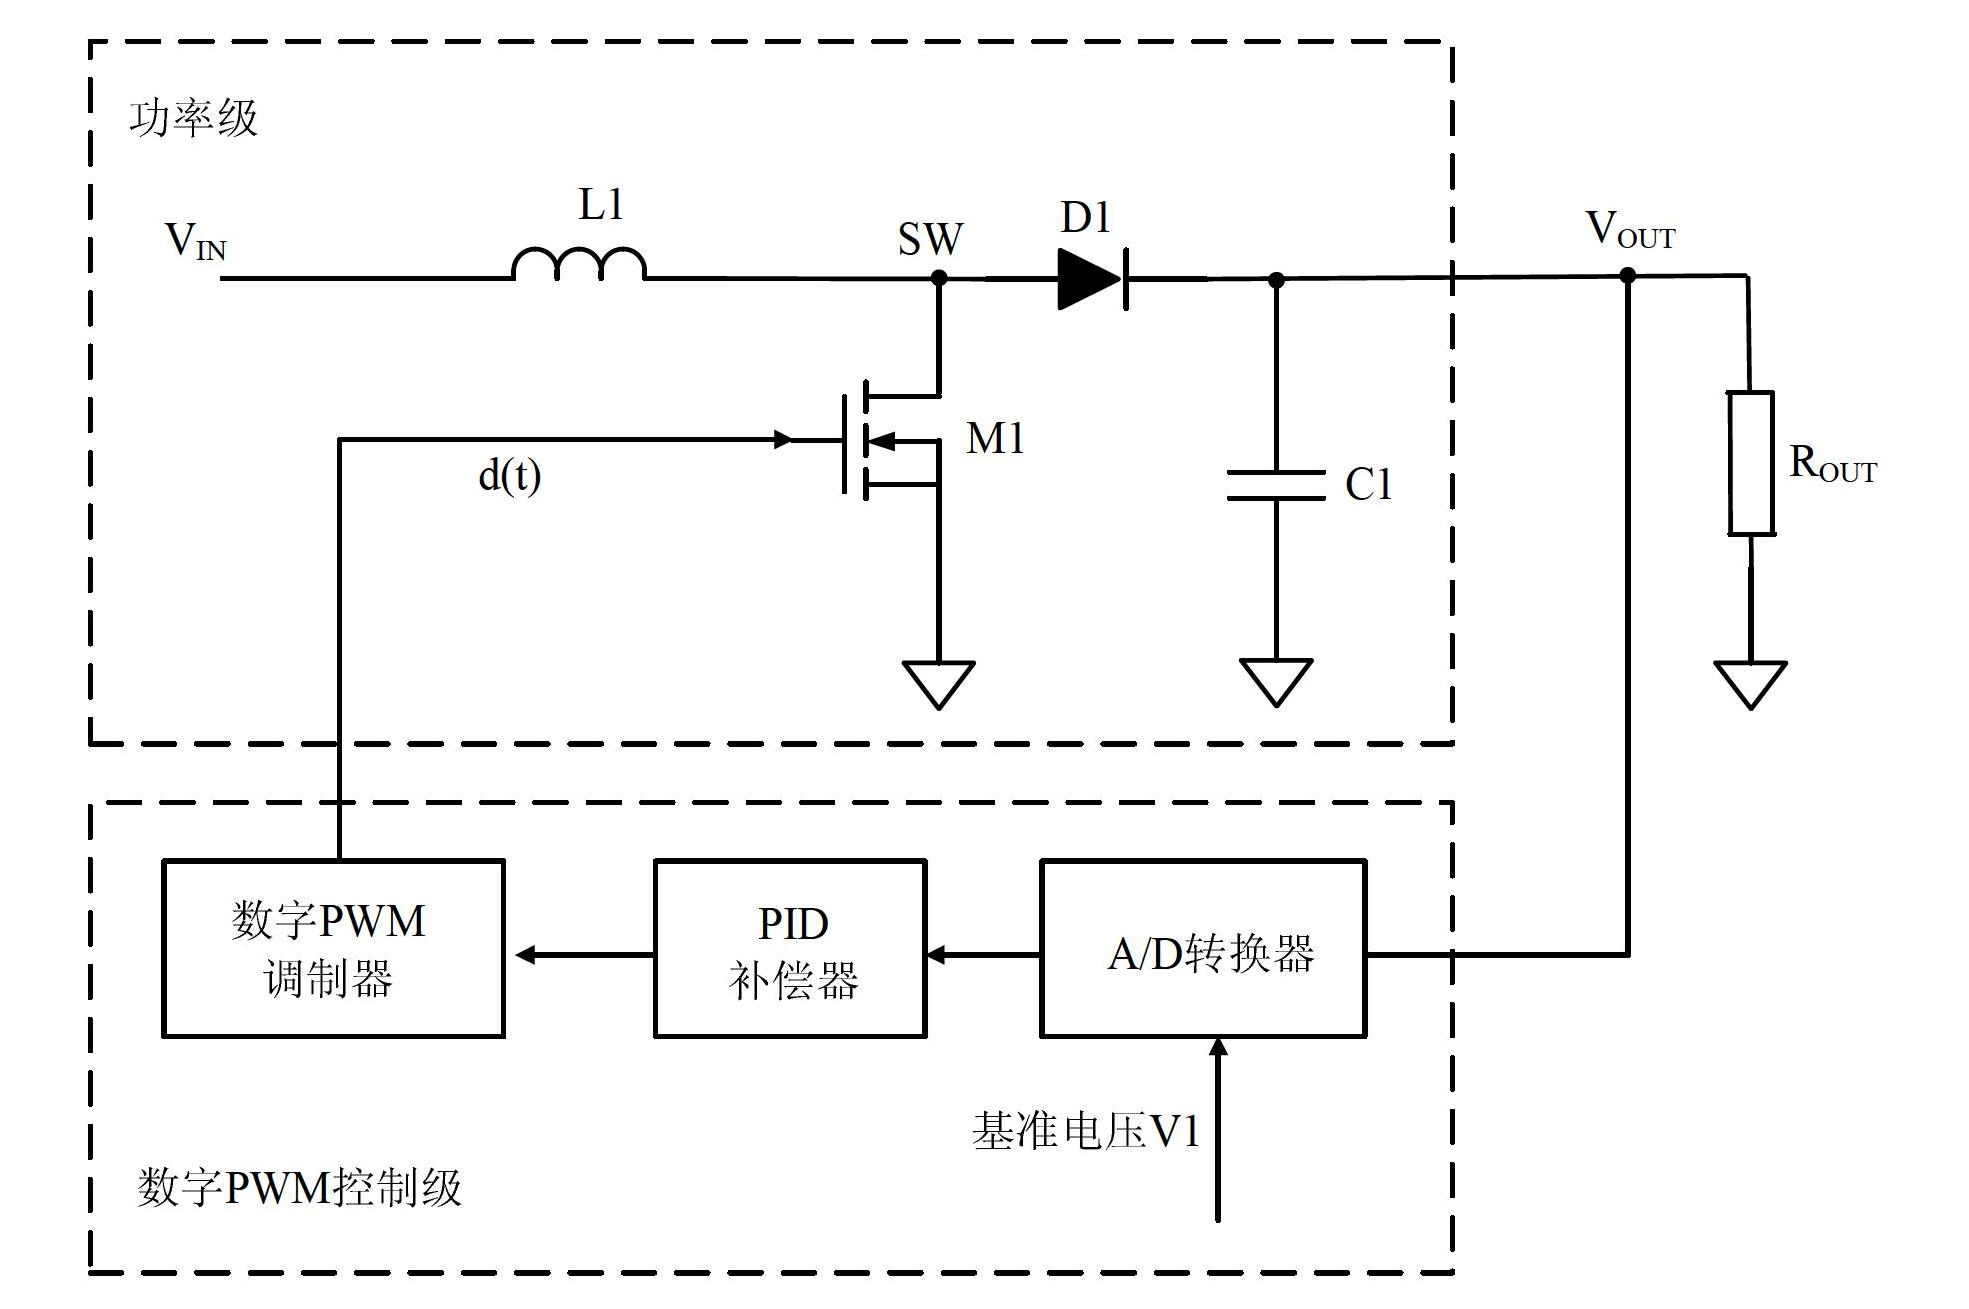 Constant current DC (Direct Current)-DC converter utilizing digital PWM (Pulse-Width Modulation) control and constant current LED (Light Emitting Diode) drive DC-DC converter